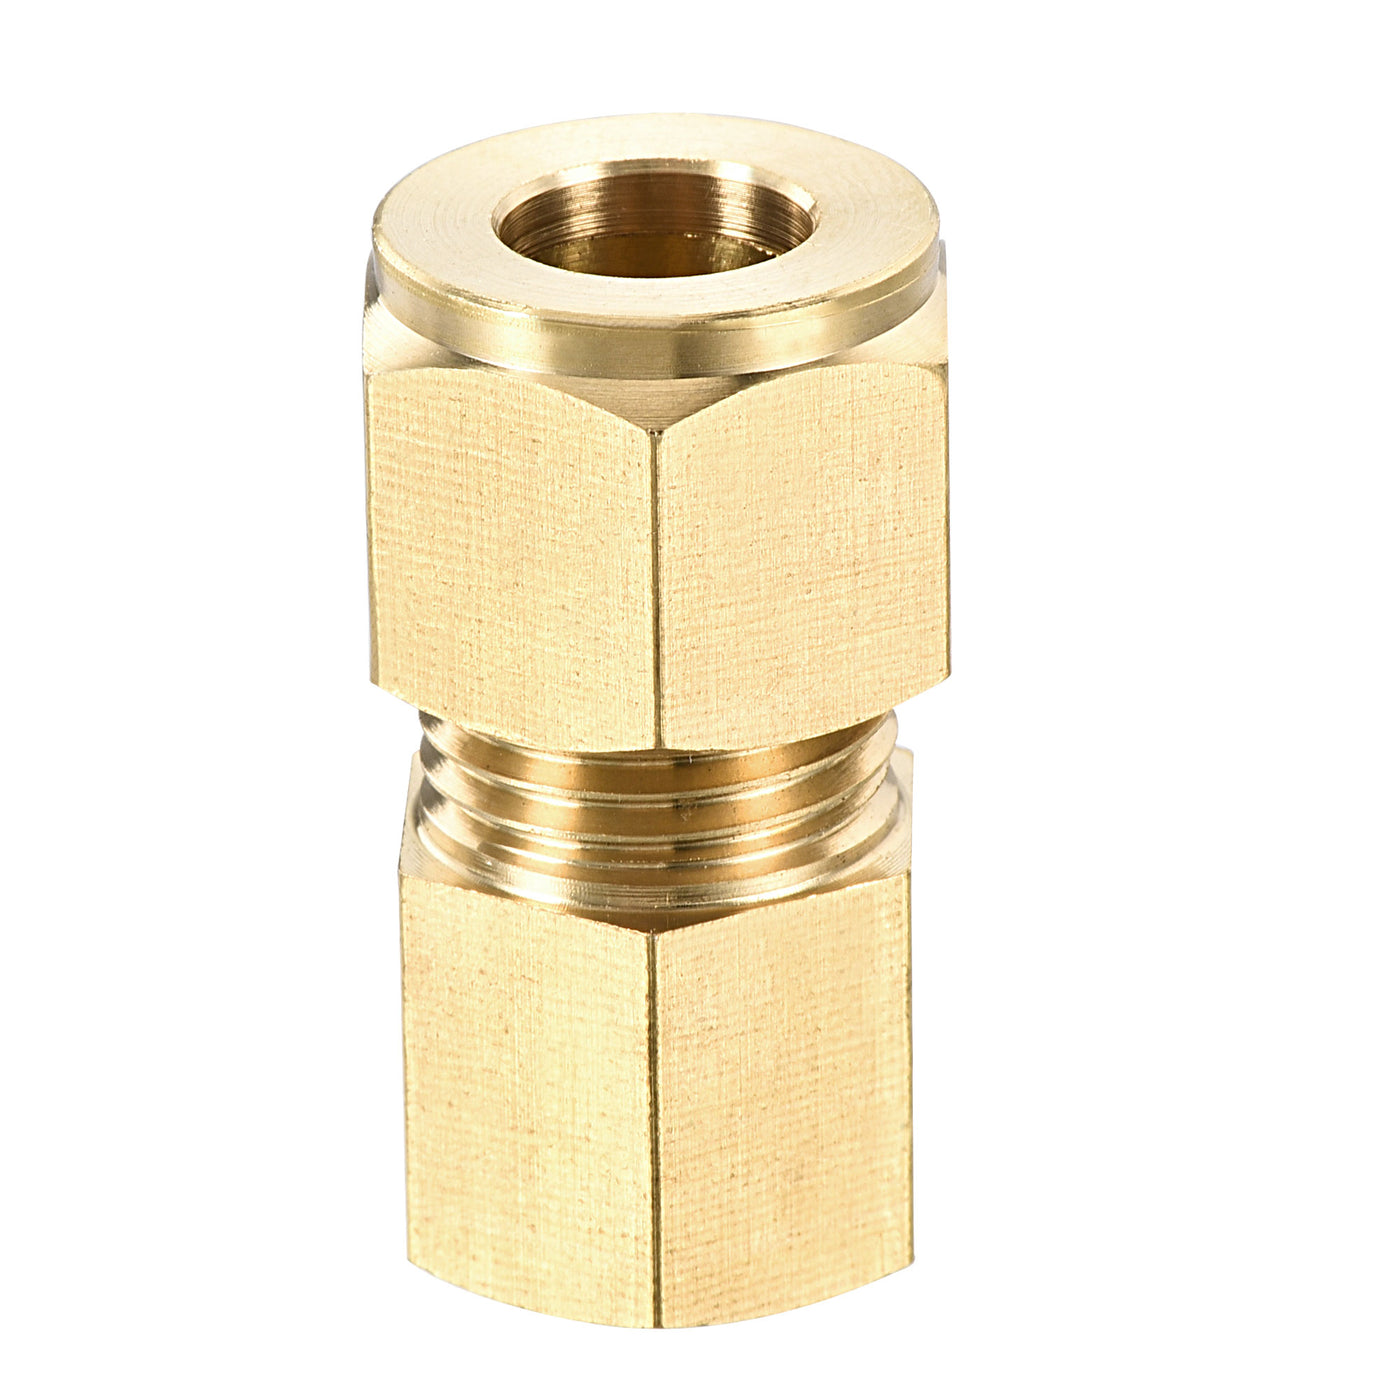 Uxcell Uxcell Compression Tube Fitting G1/4 Female Thread x 6mm Tube OD Straight Coupling Adapter Brass